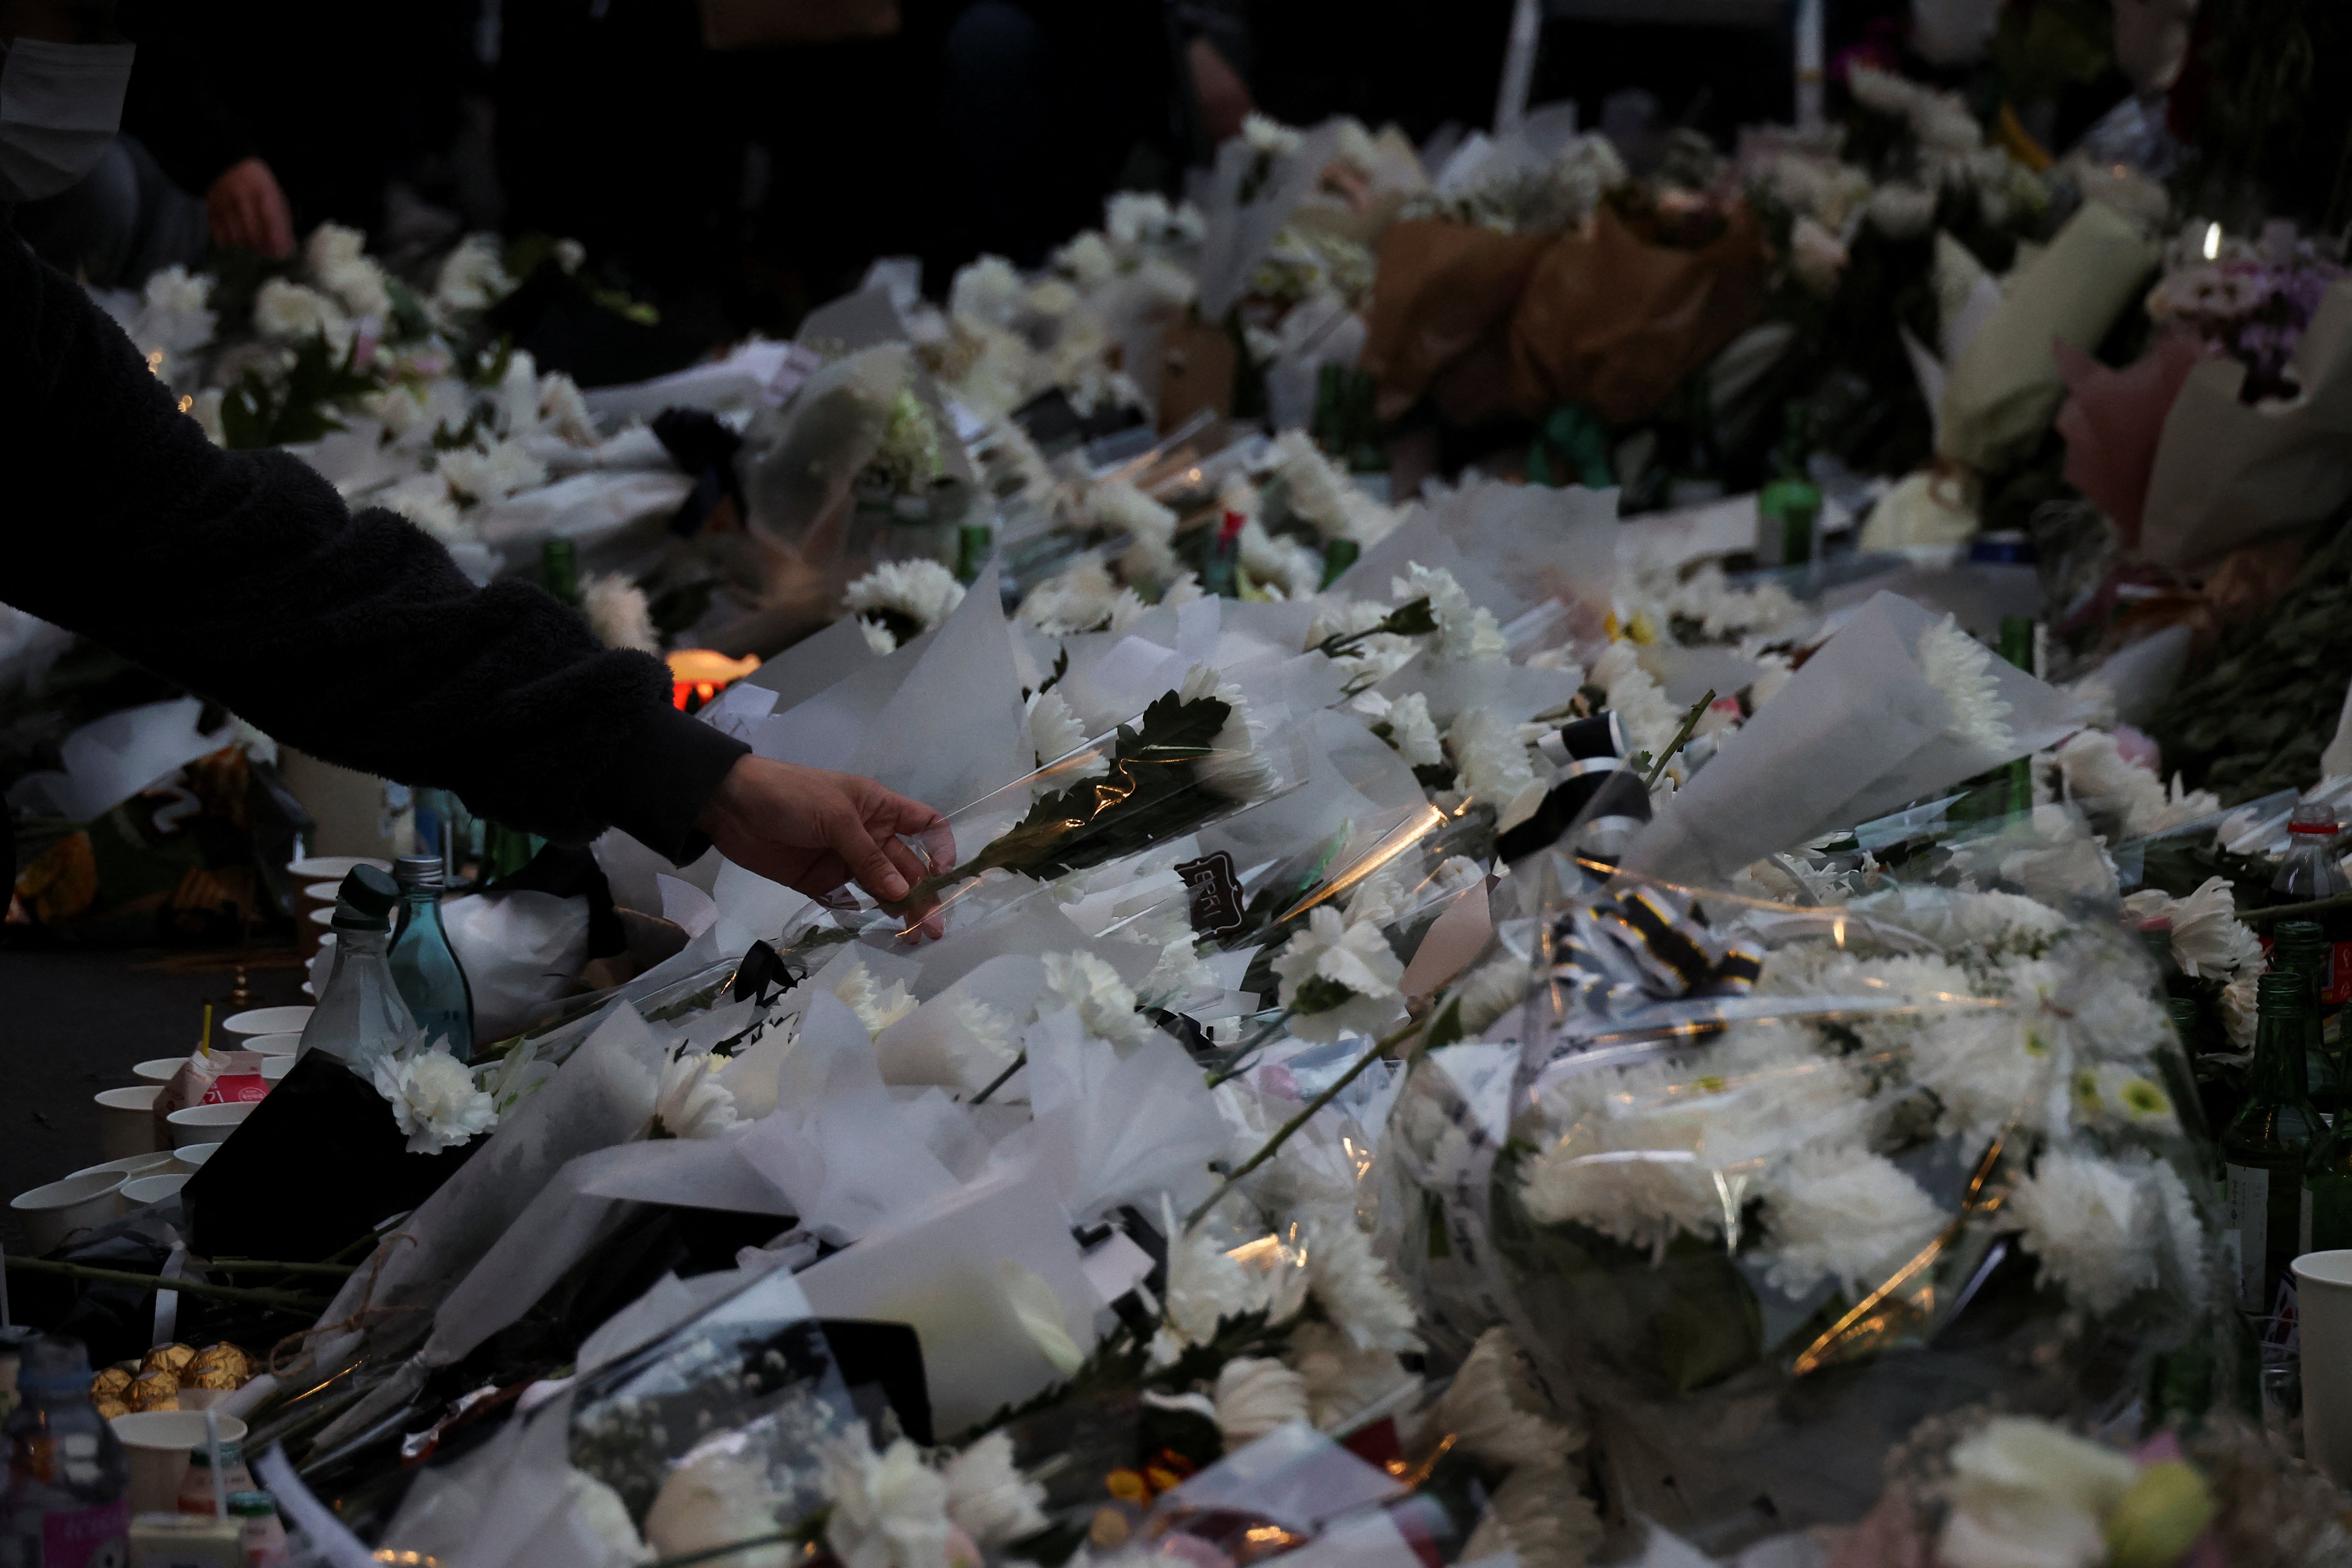 A mourner lays flowers at a tribute site for those killed in the stampede